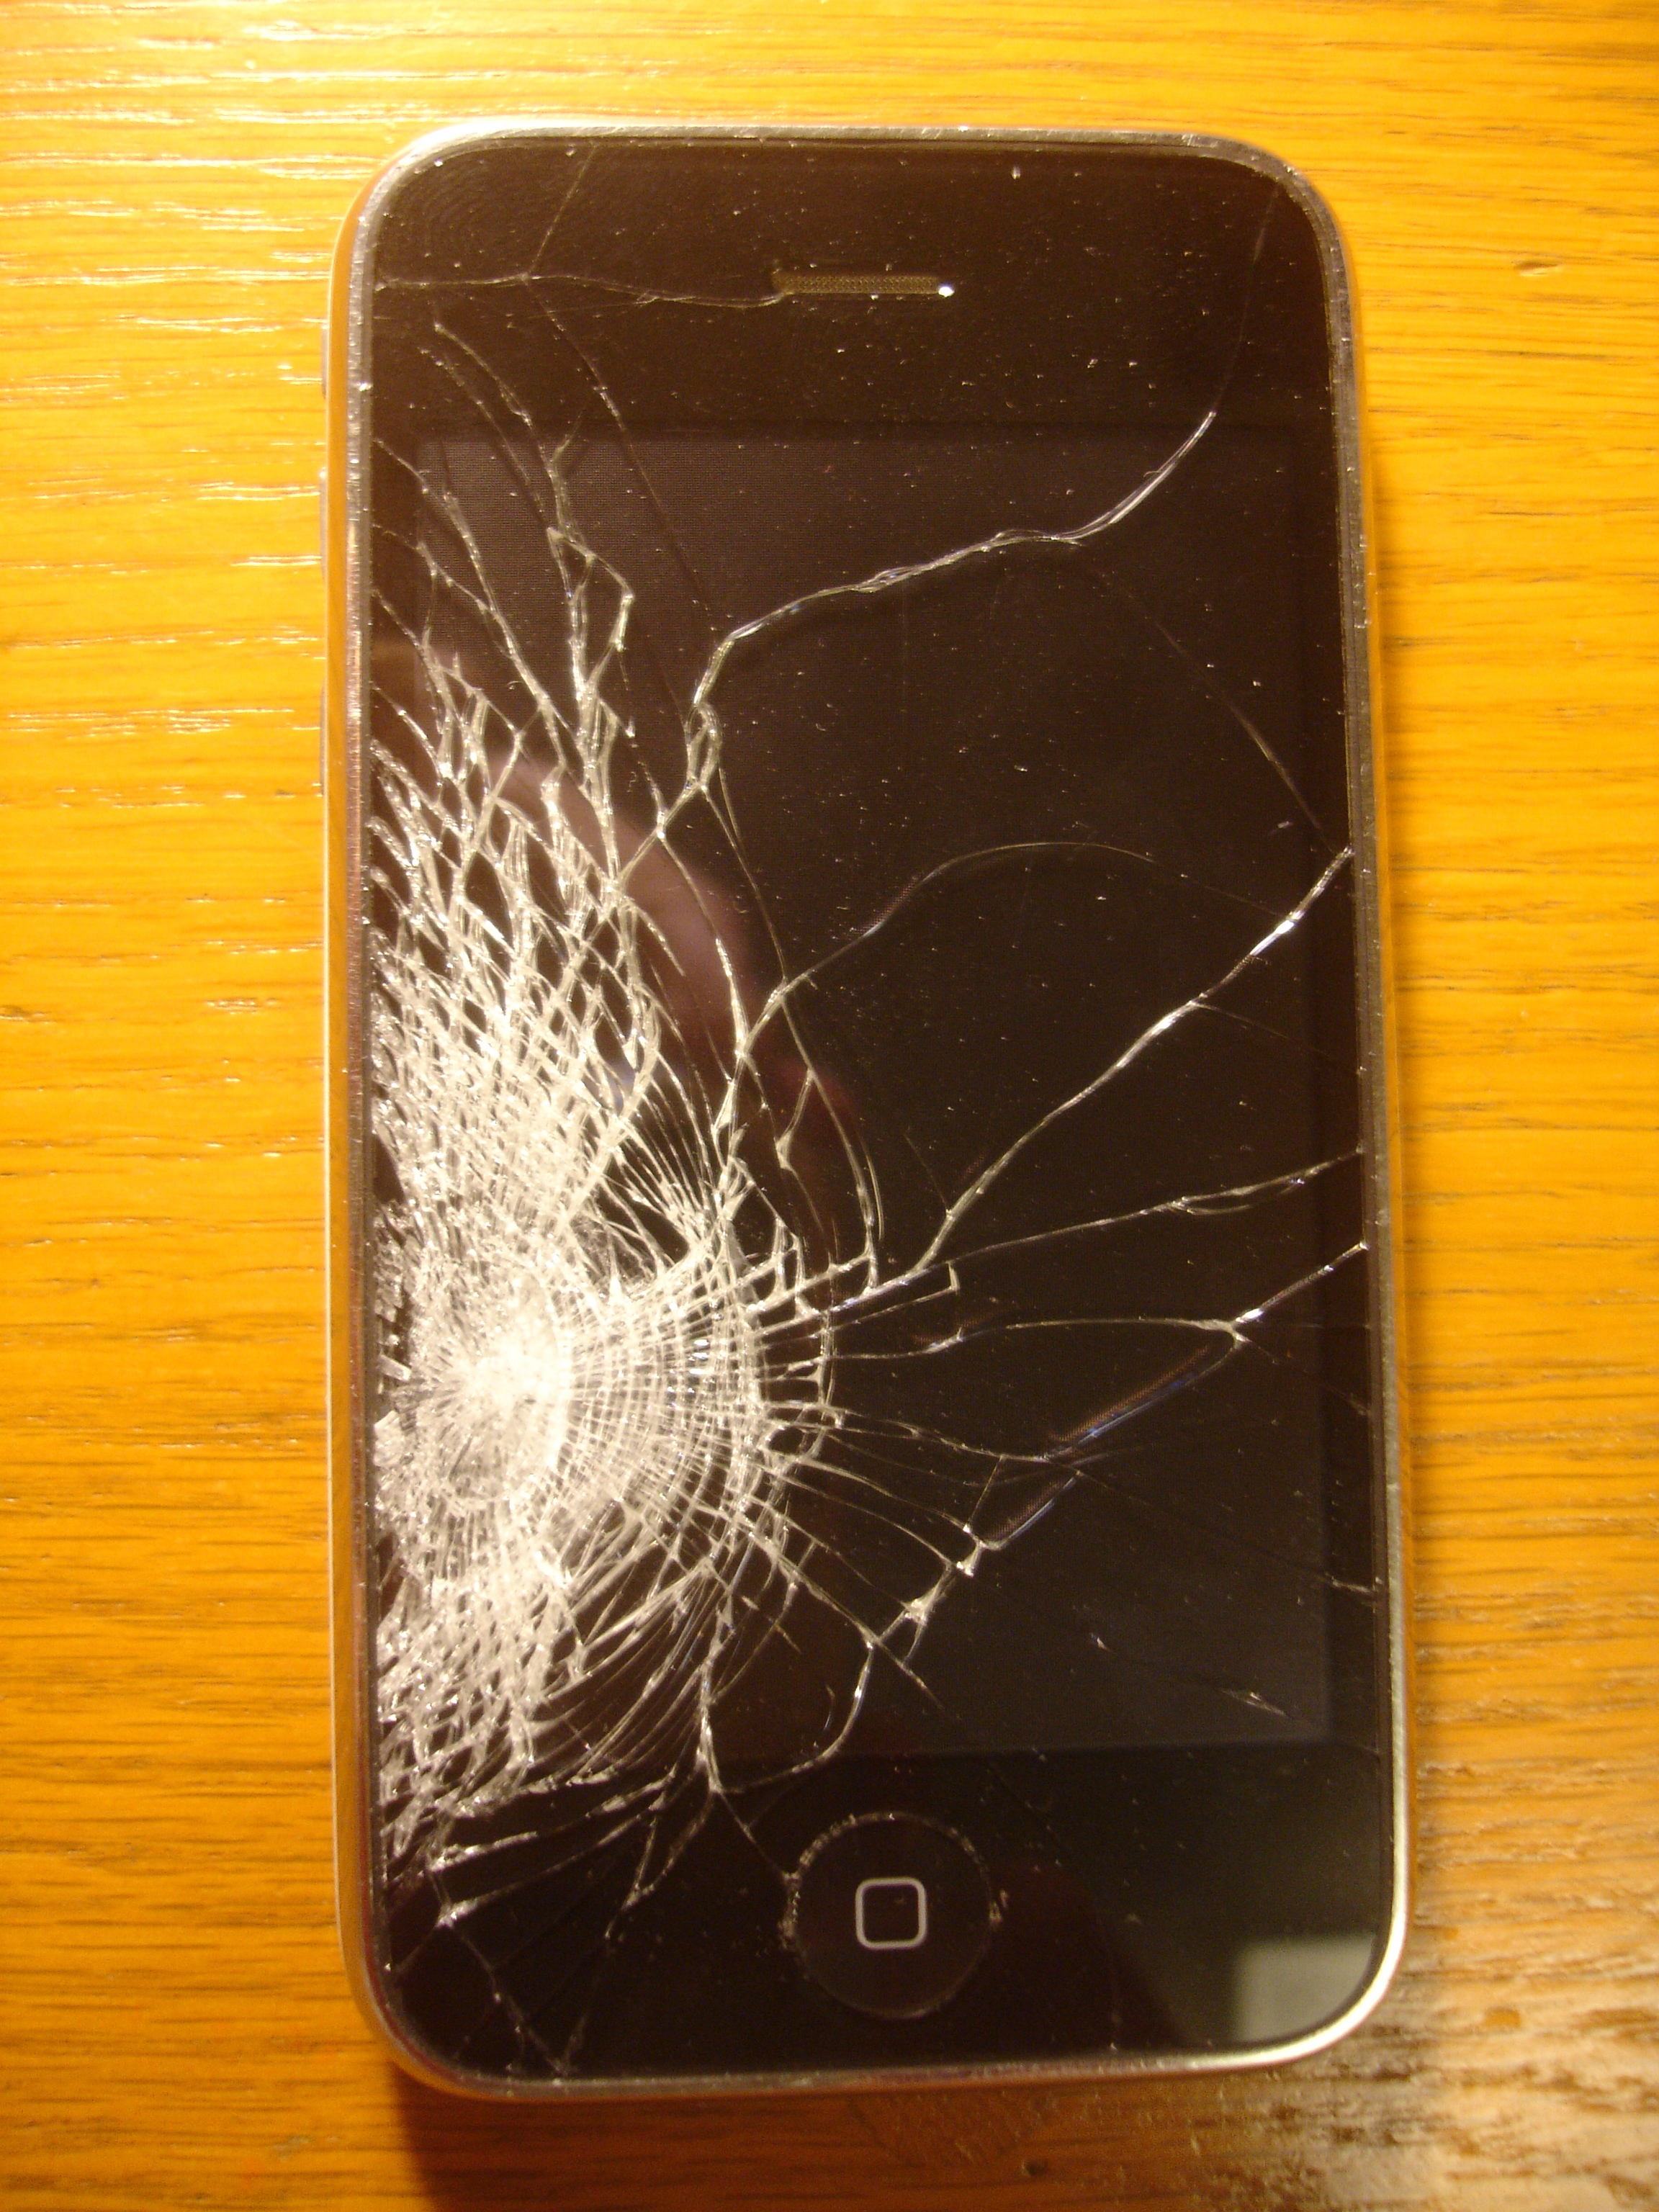 Shattered iPhone screen